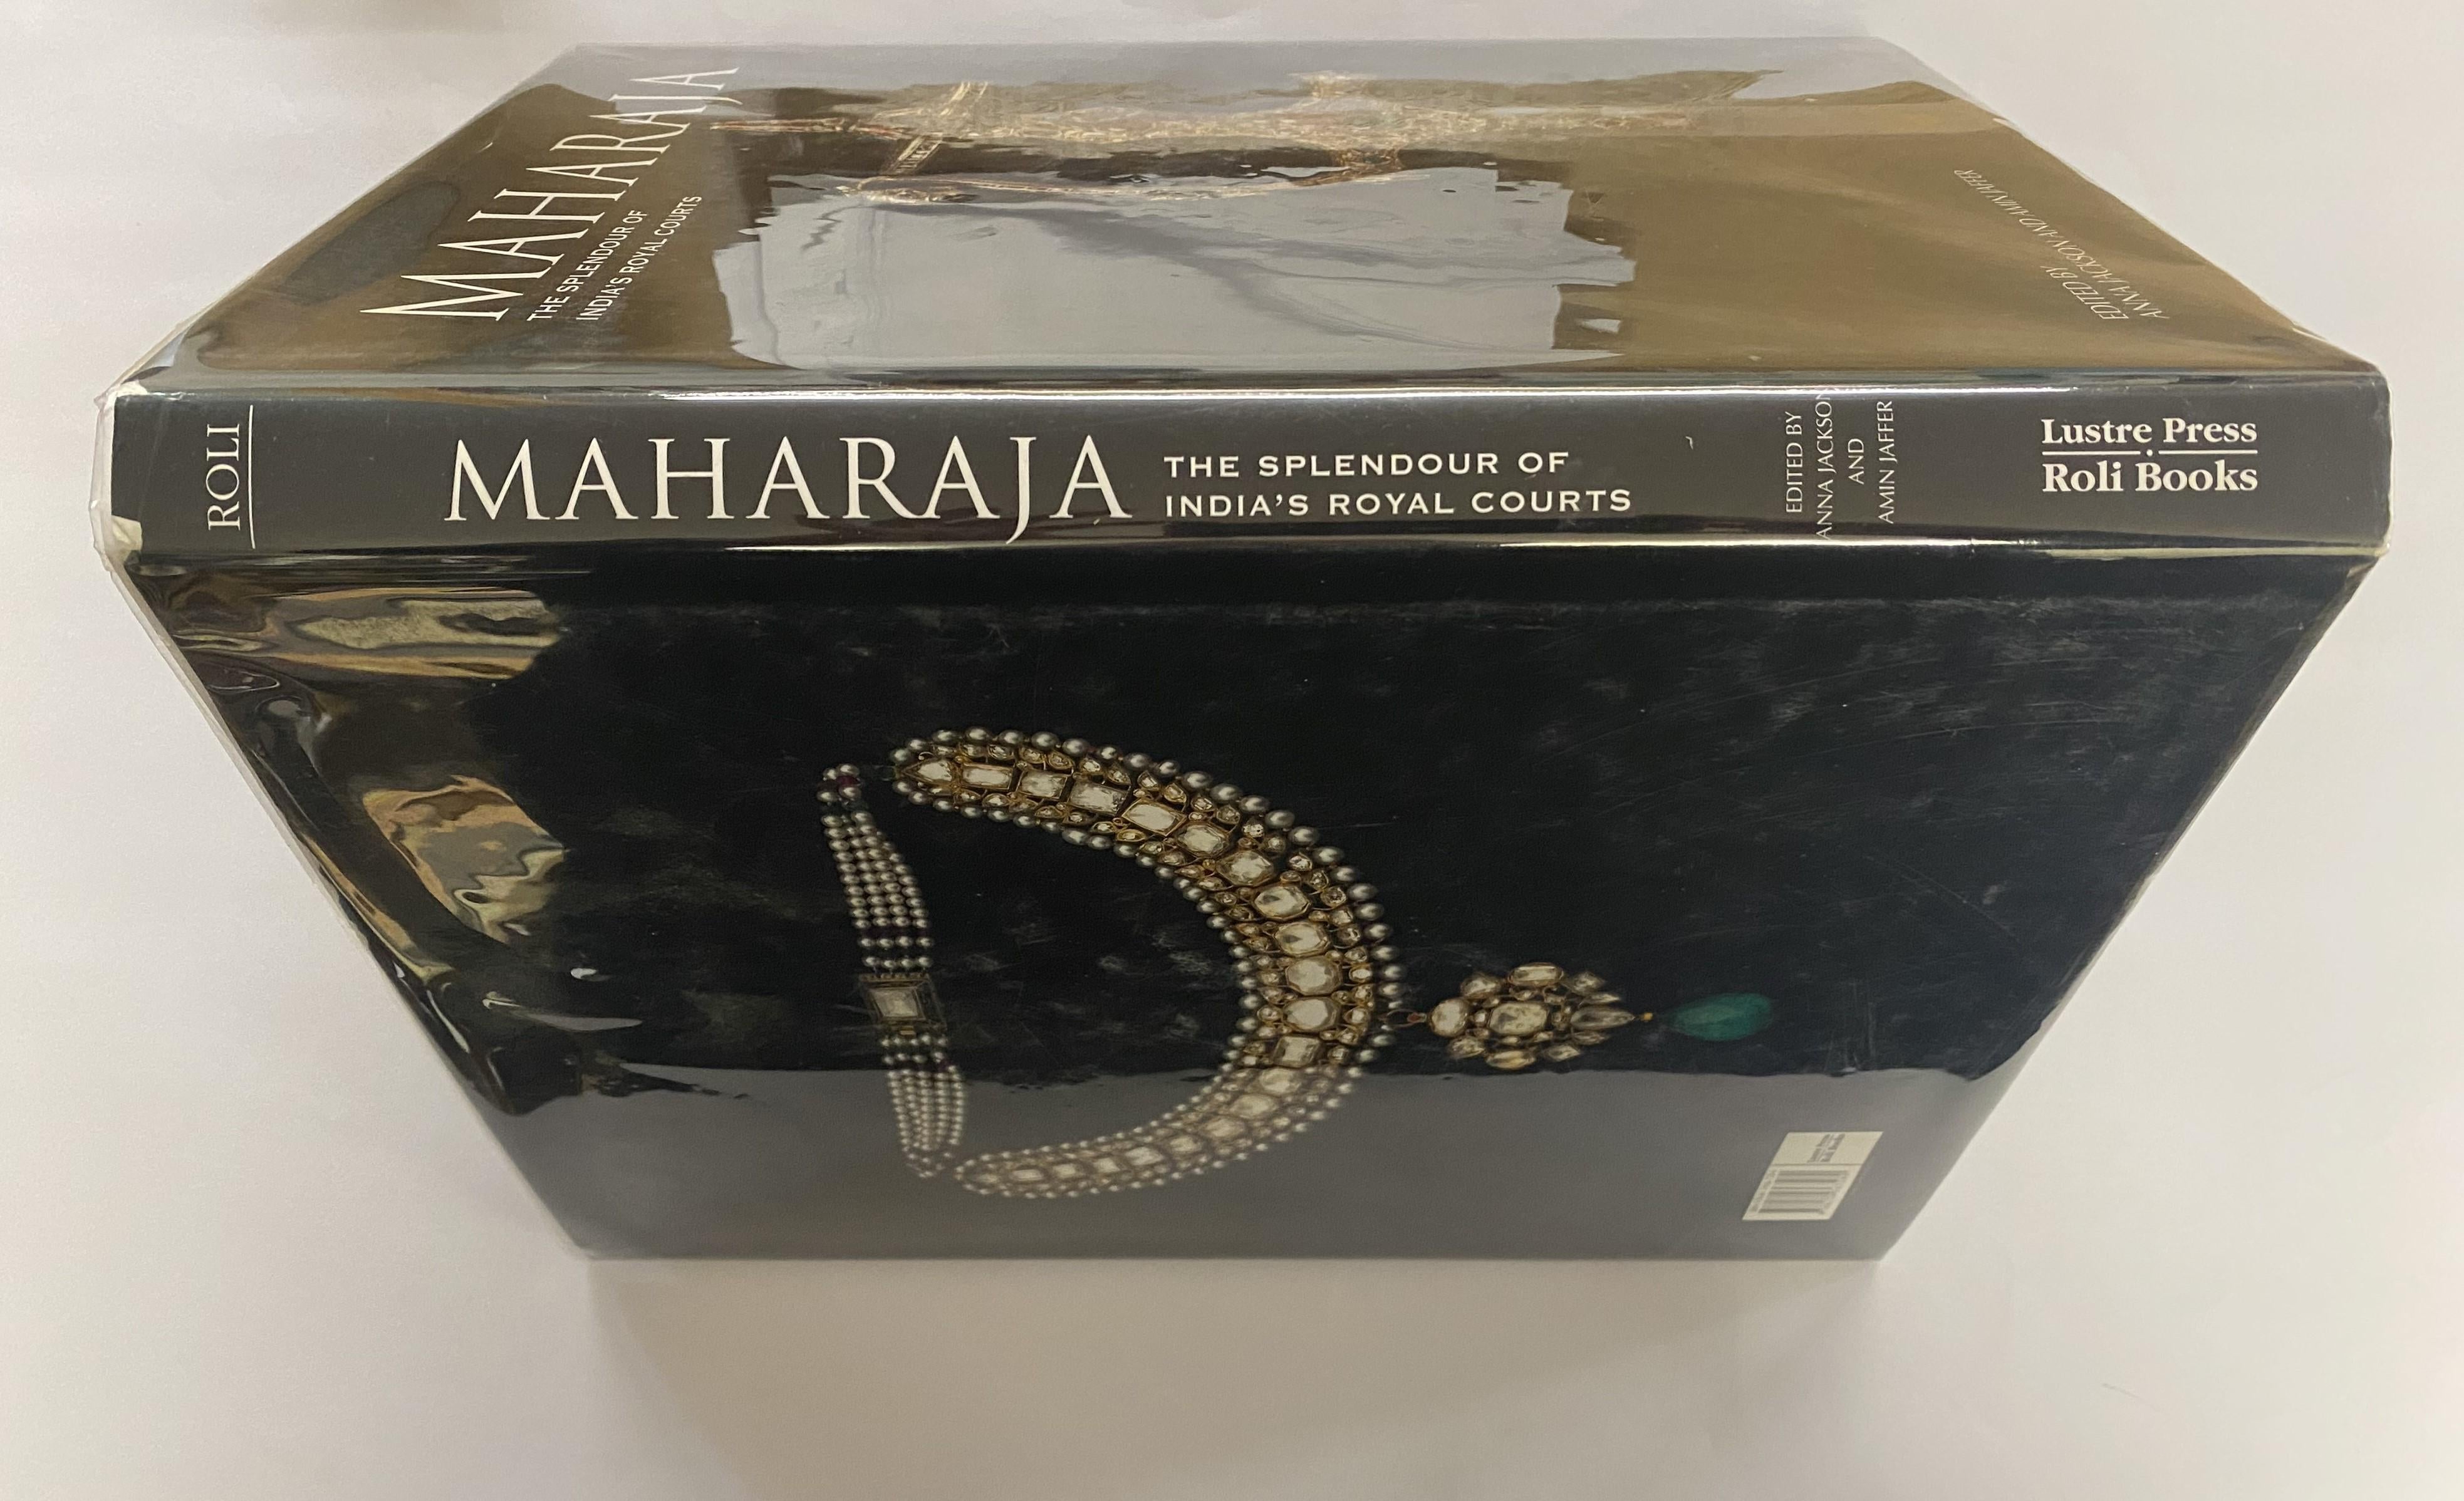 Maharaja: The Splendour of India's Royal Courts (Buch) im Angebot 13